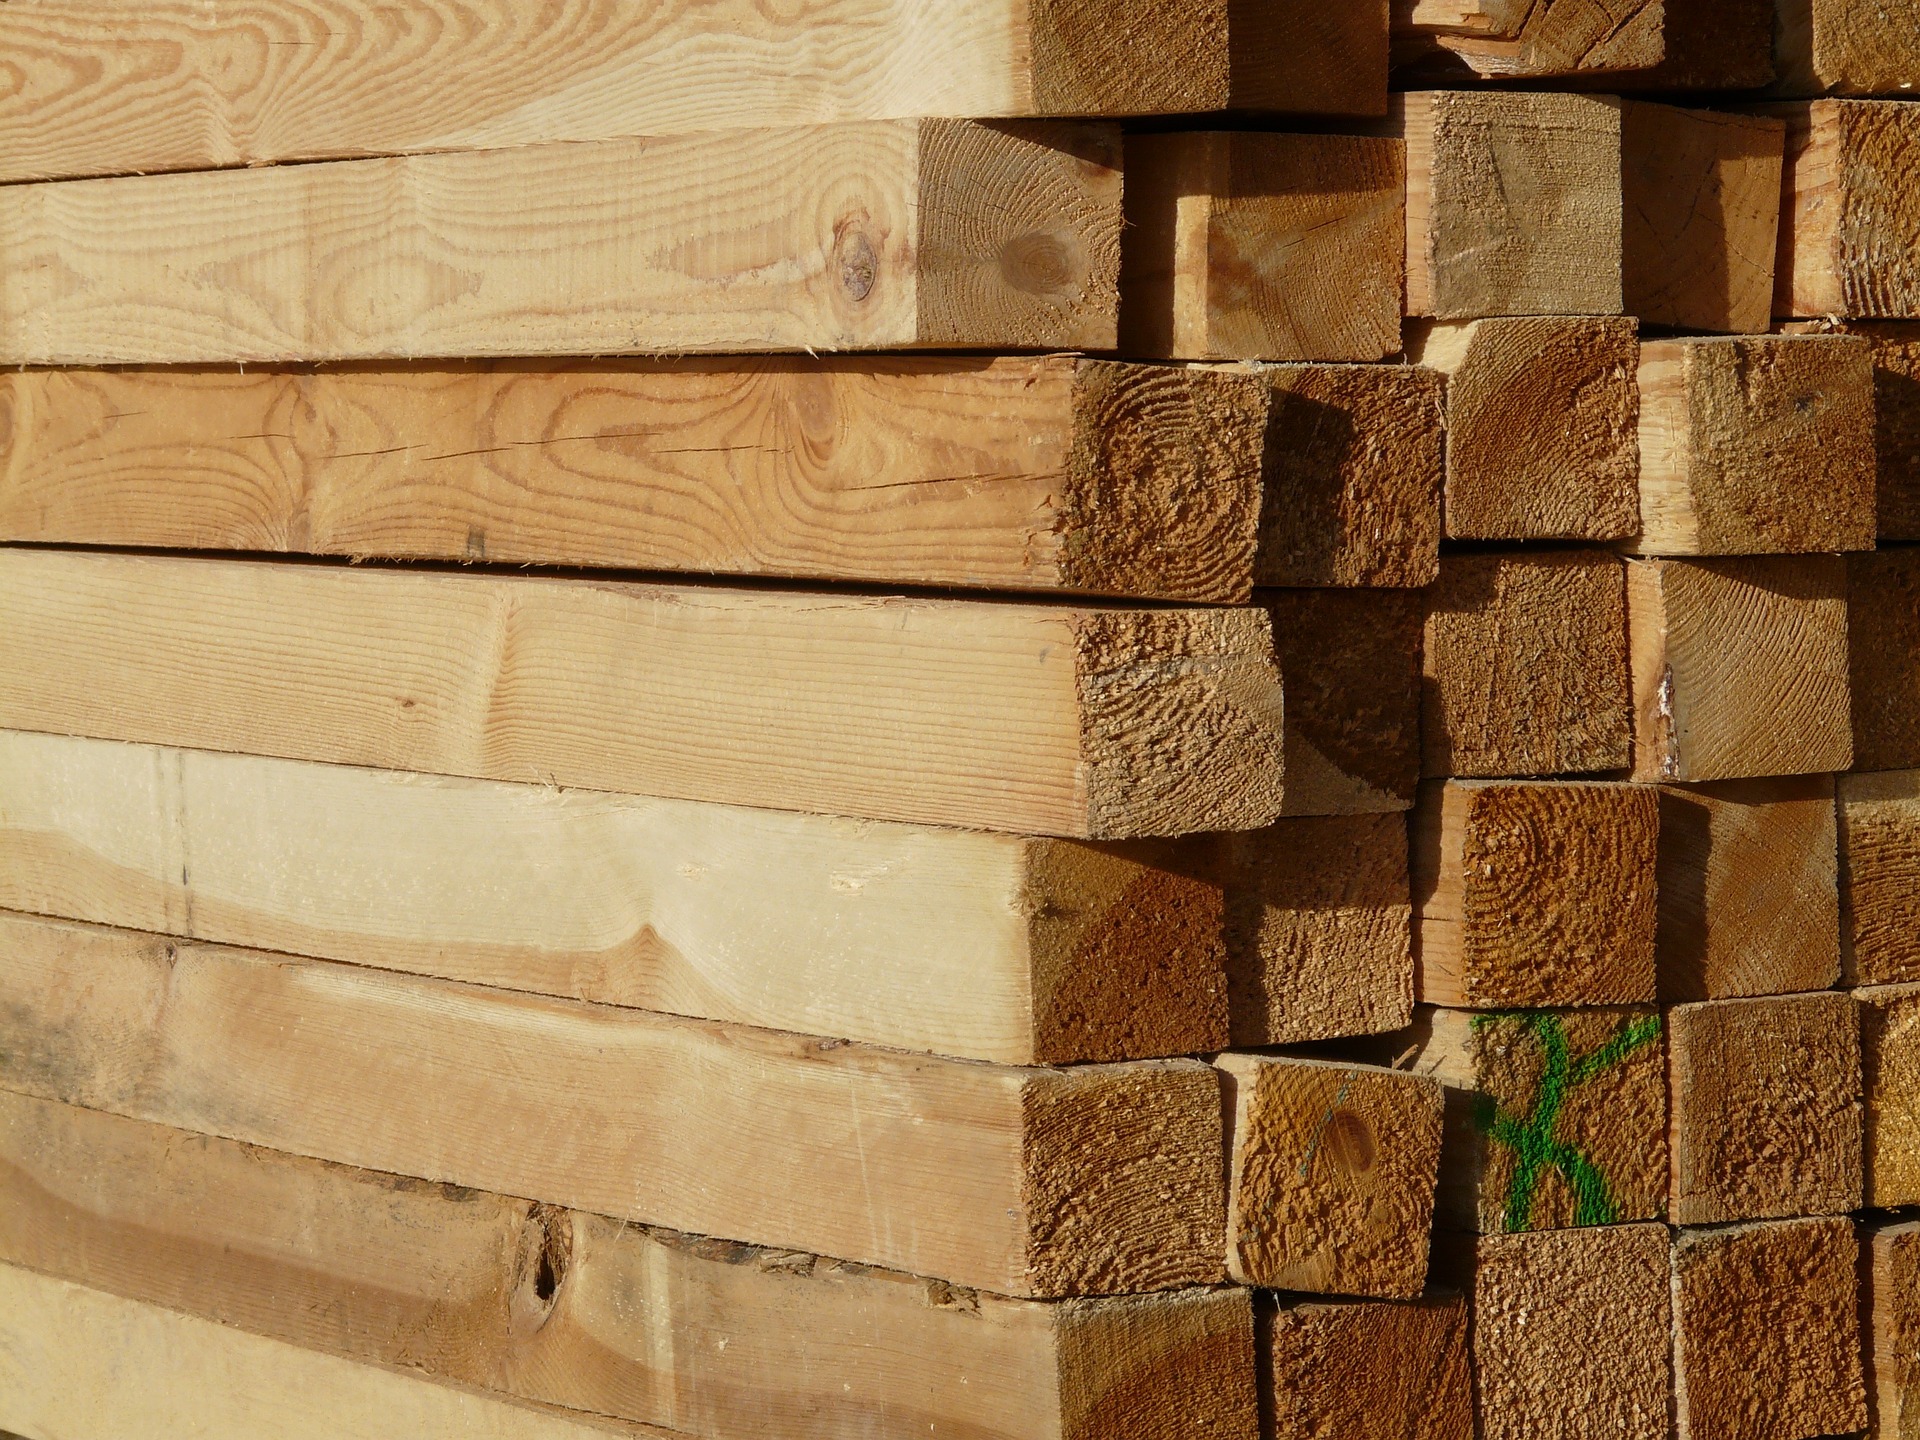 4x4 lumber from our full-service lumber yard.